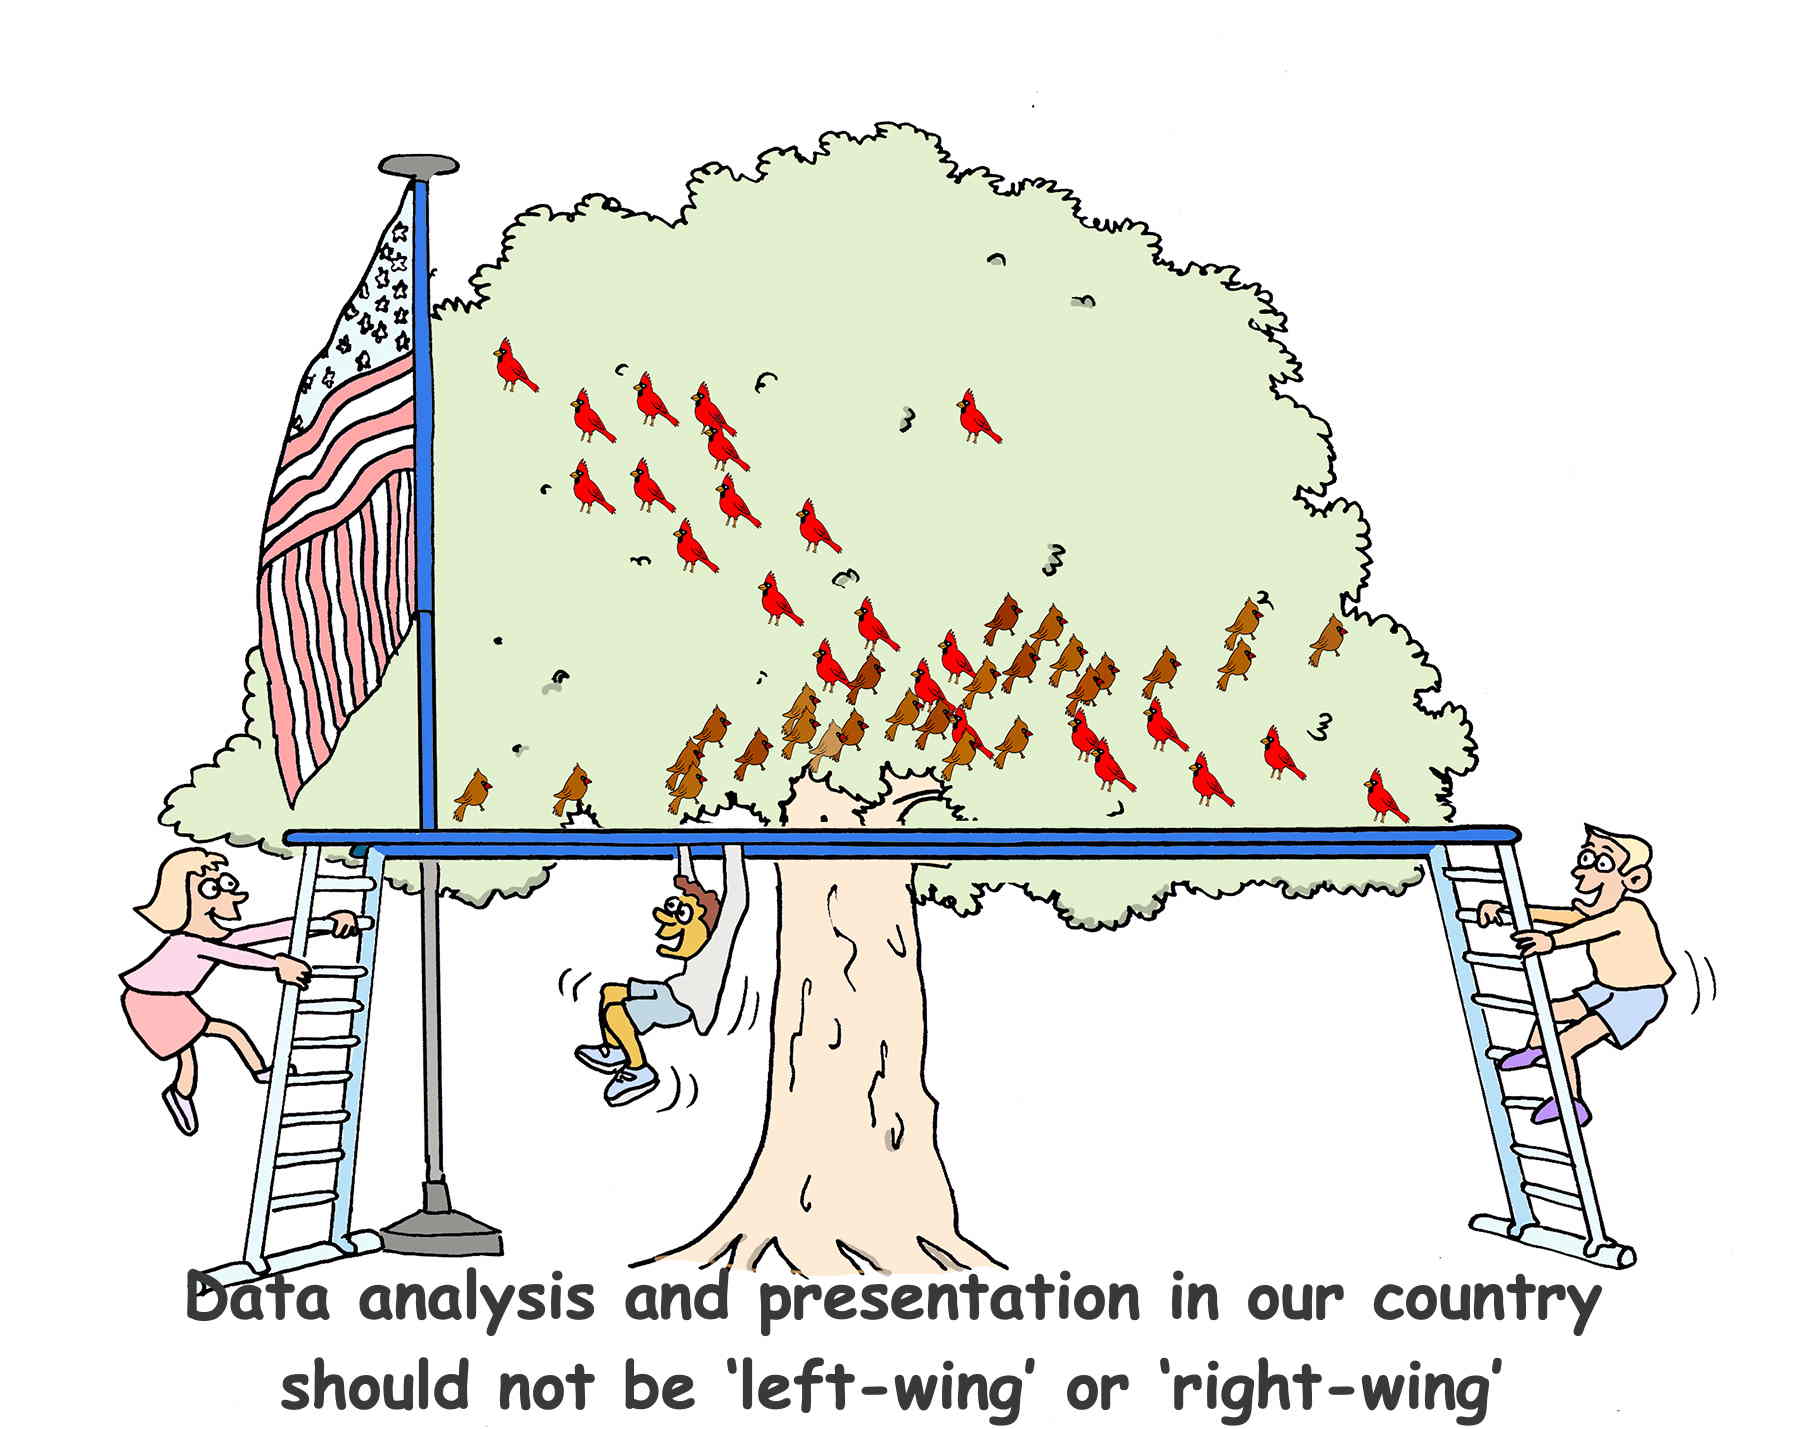 cartoon showing tree with two types of birds positioned to look like two regression lines. Caption says: Data analysis and prèsentation in our country should not be left-wing' or right-wing